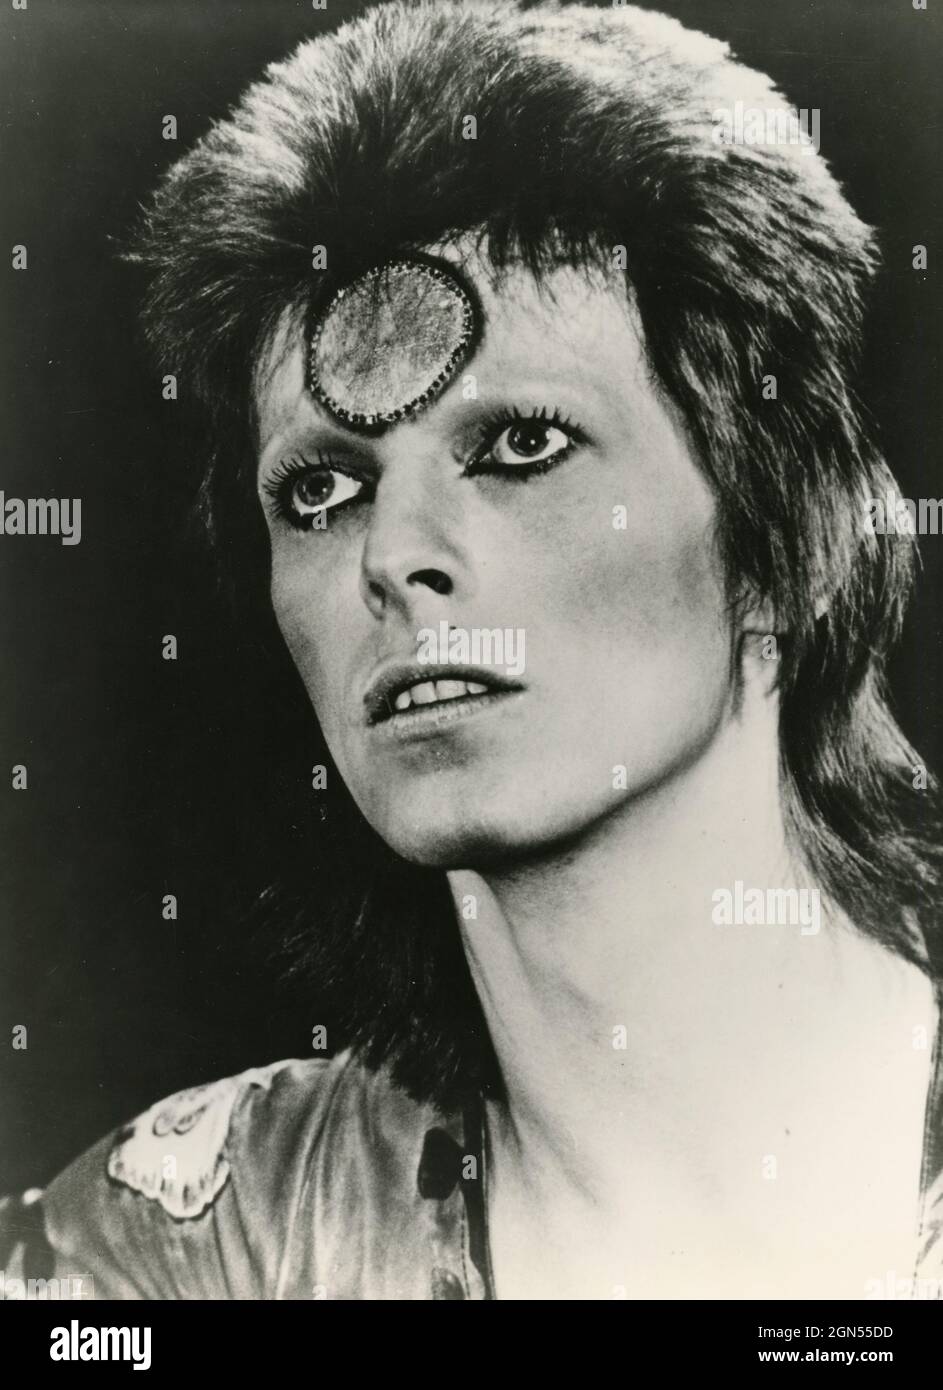 British singer and songwriter David Bowie, 1970s Stock Photo